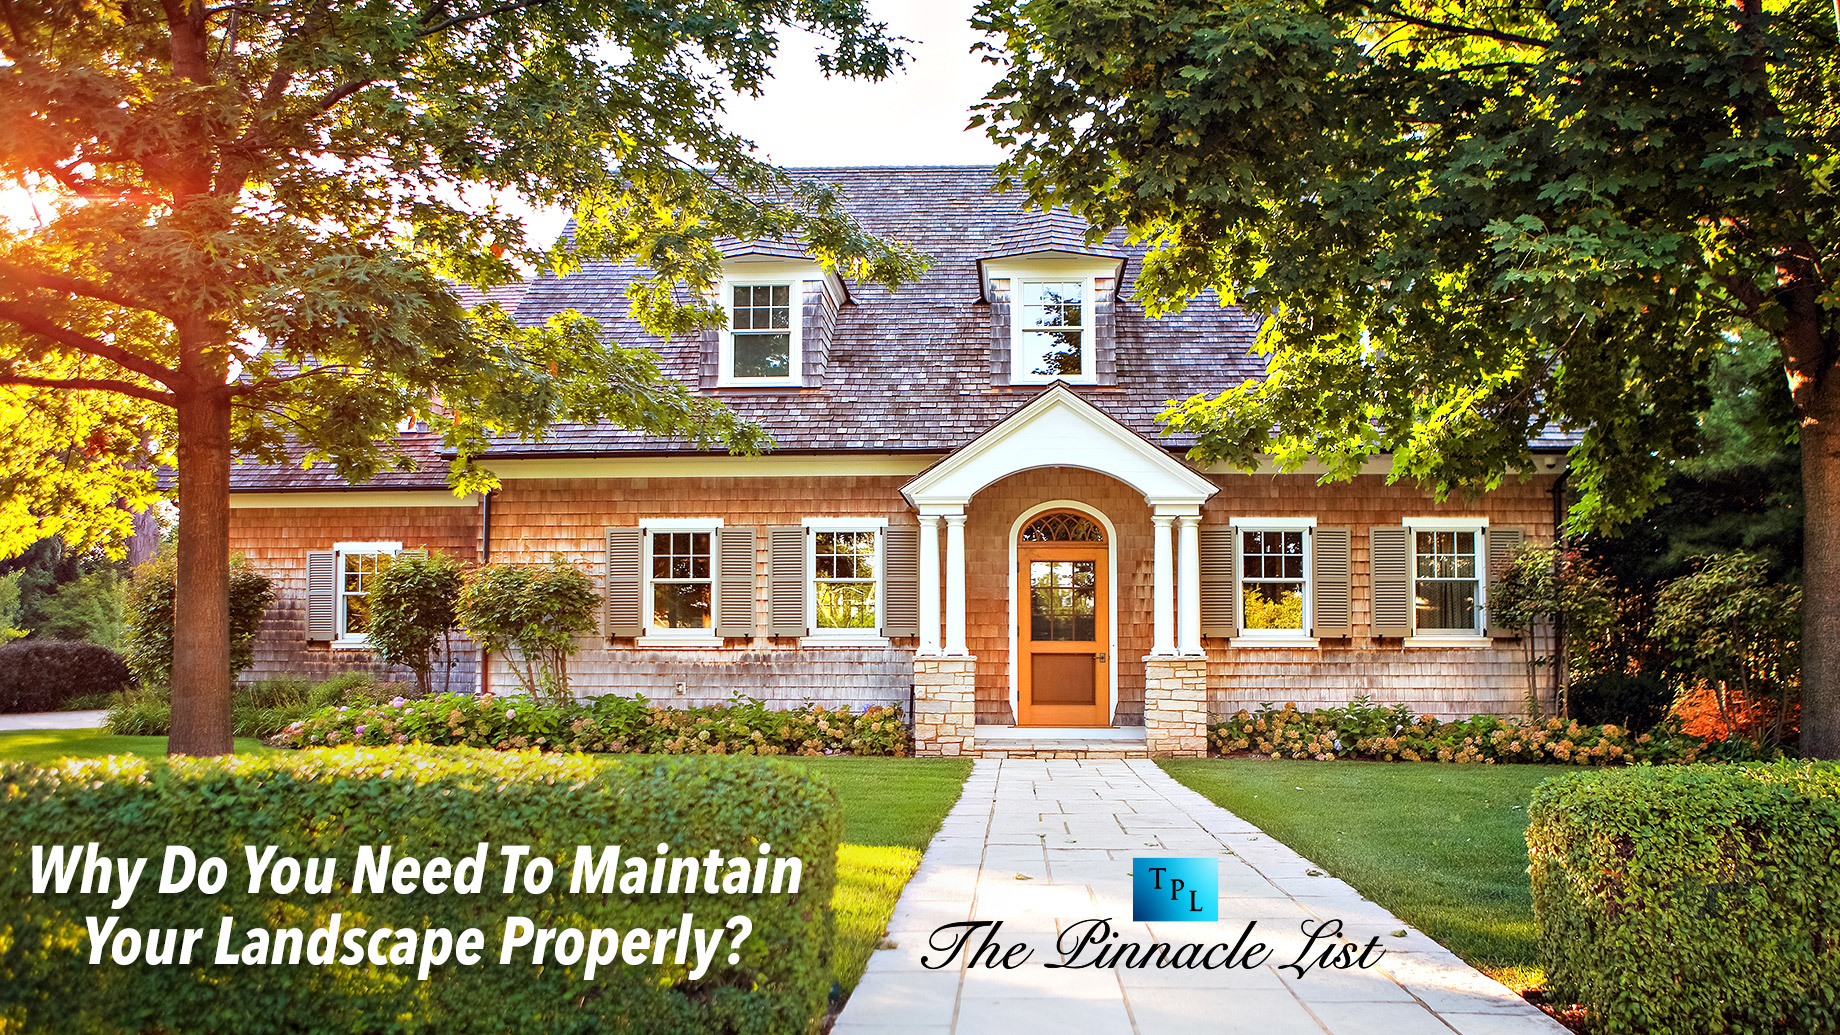 Why Do You Need To Maintain Your Landscape Properly?